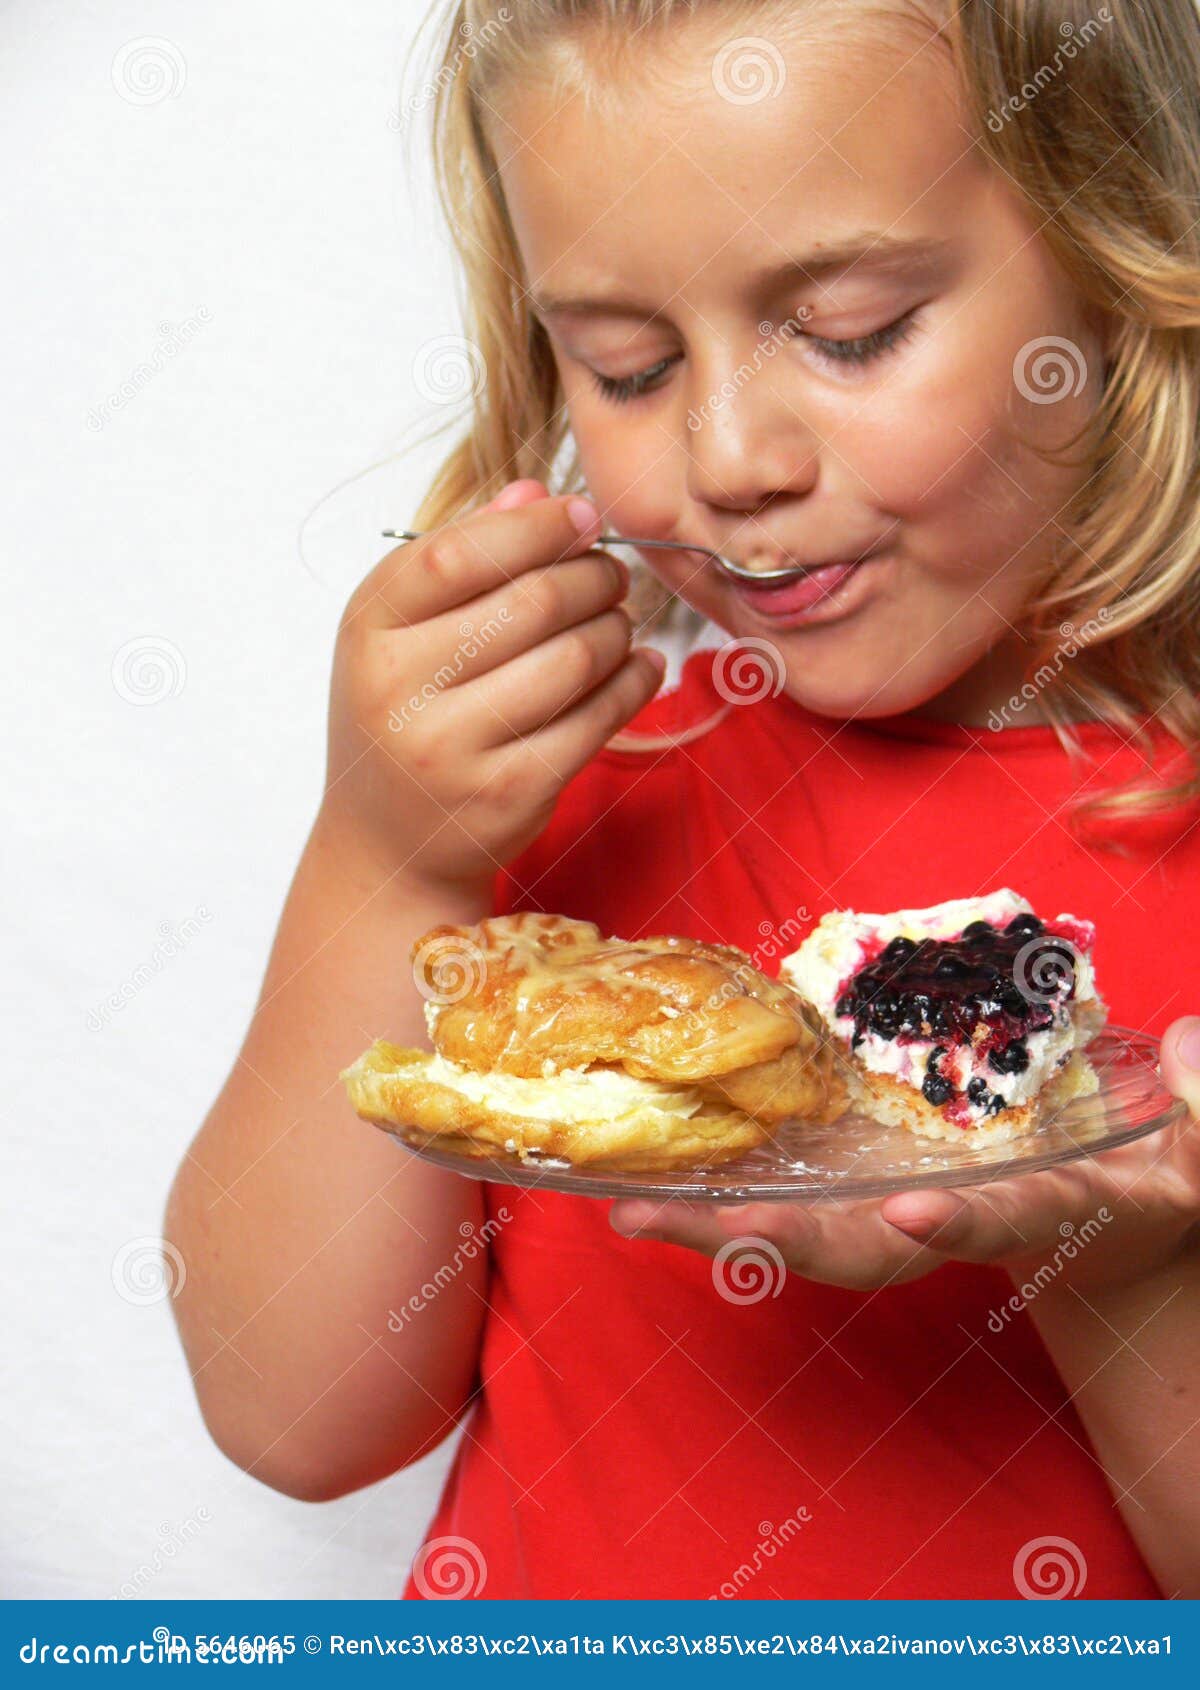 Child Is Eating Sweets Royalty Free Stock Photo - Image: 5646065